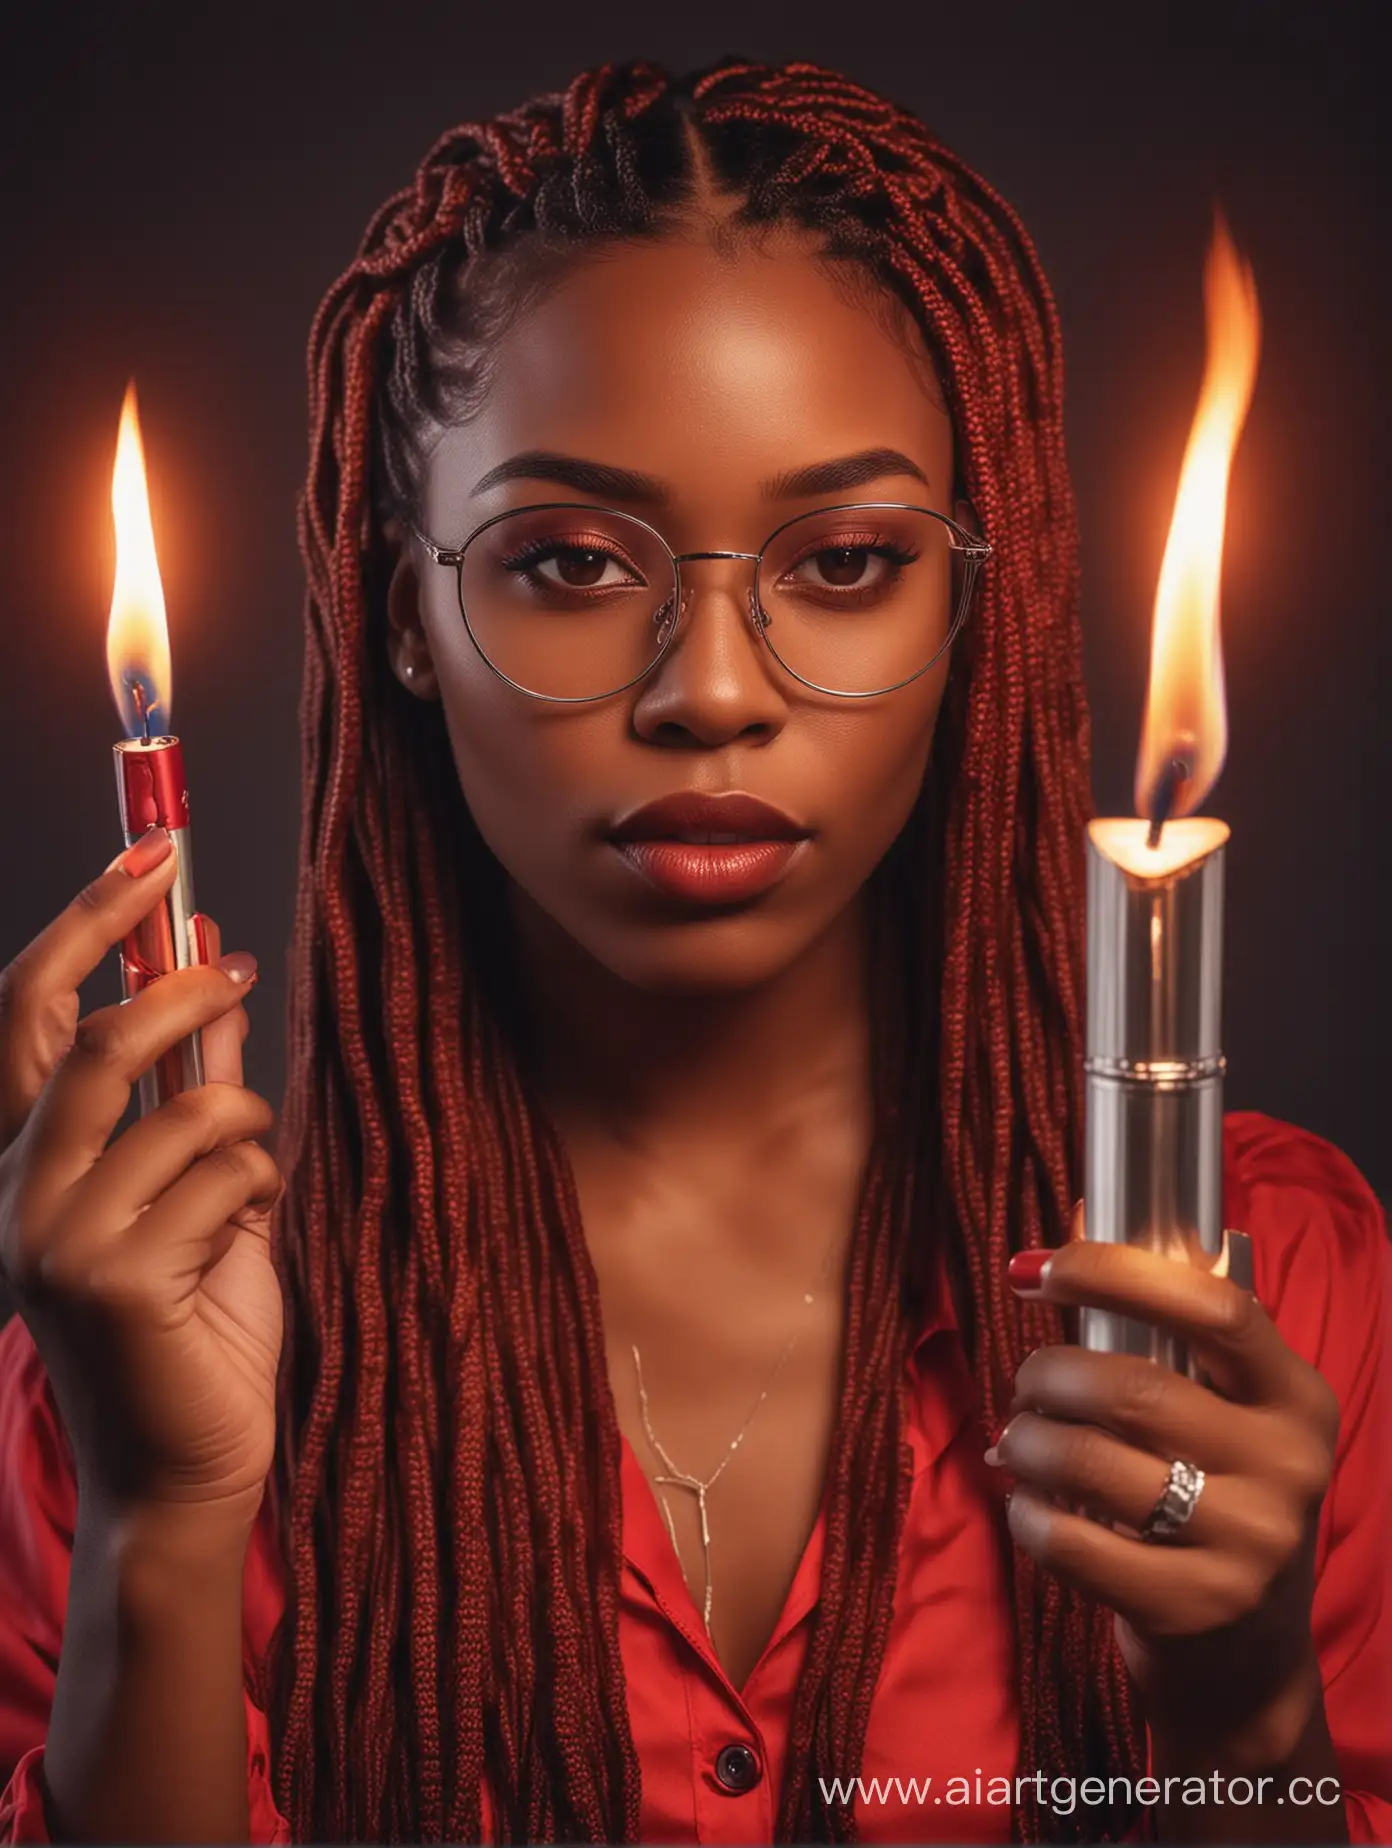 African-American-Woman-with-Red-Braids-Lighting-a-Flame